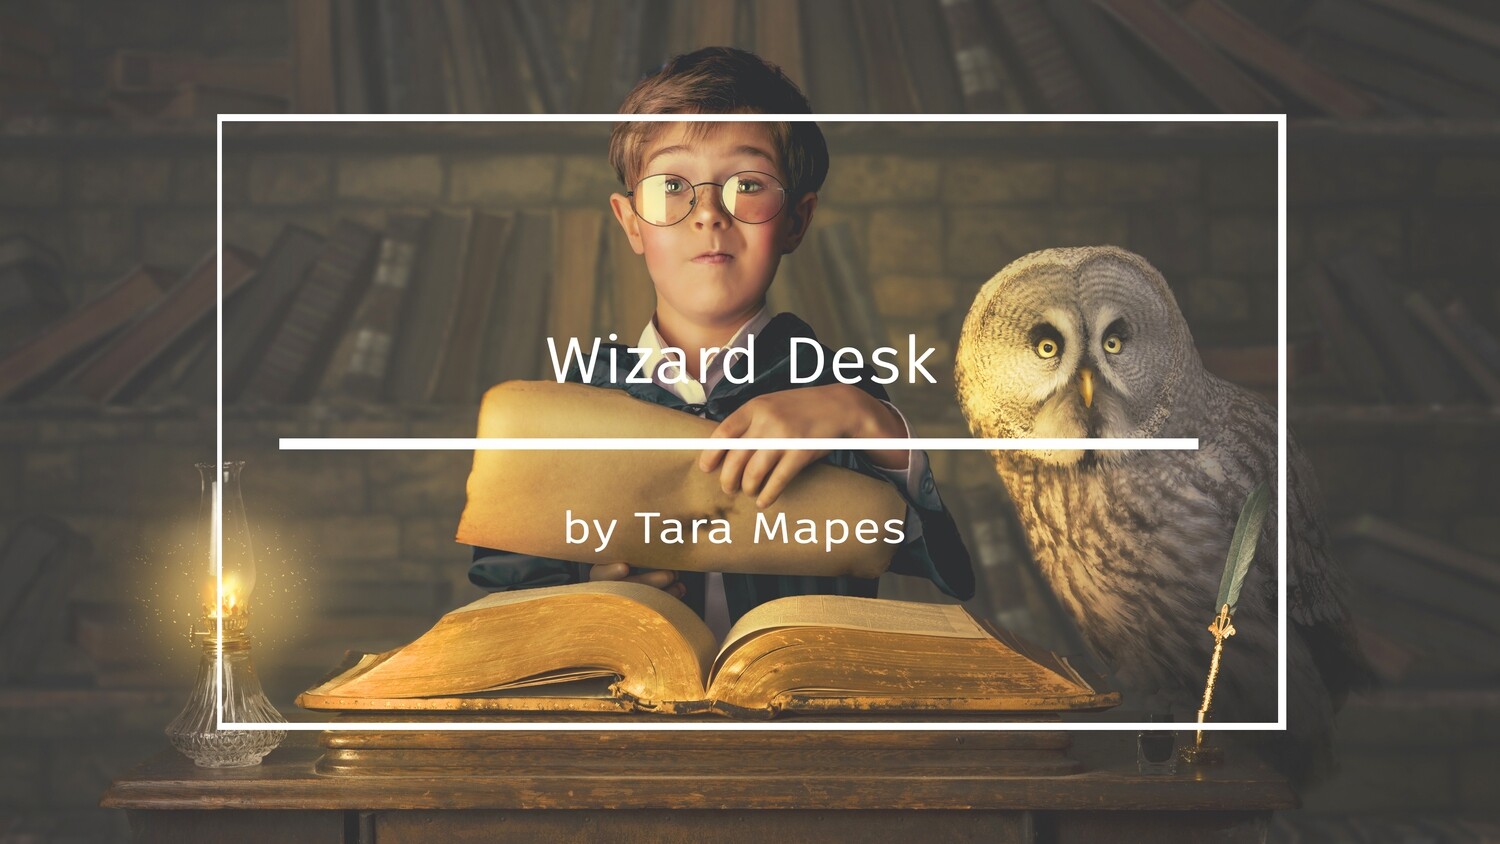 Photoshop Tutorial on How To Extract and Blend Your Subject into Wizard Desk Background in Photoshop by Tara Mapes